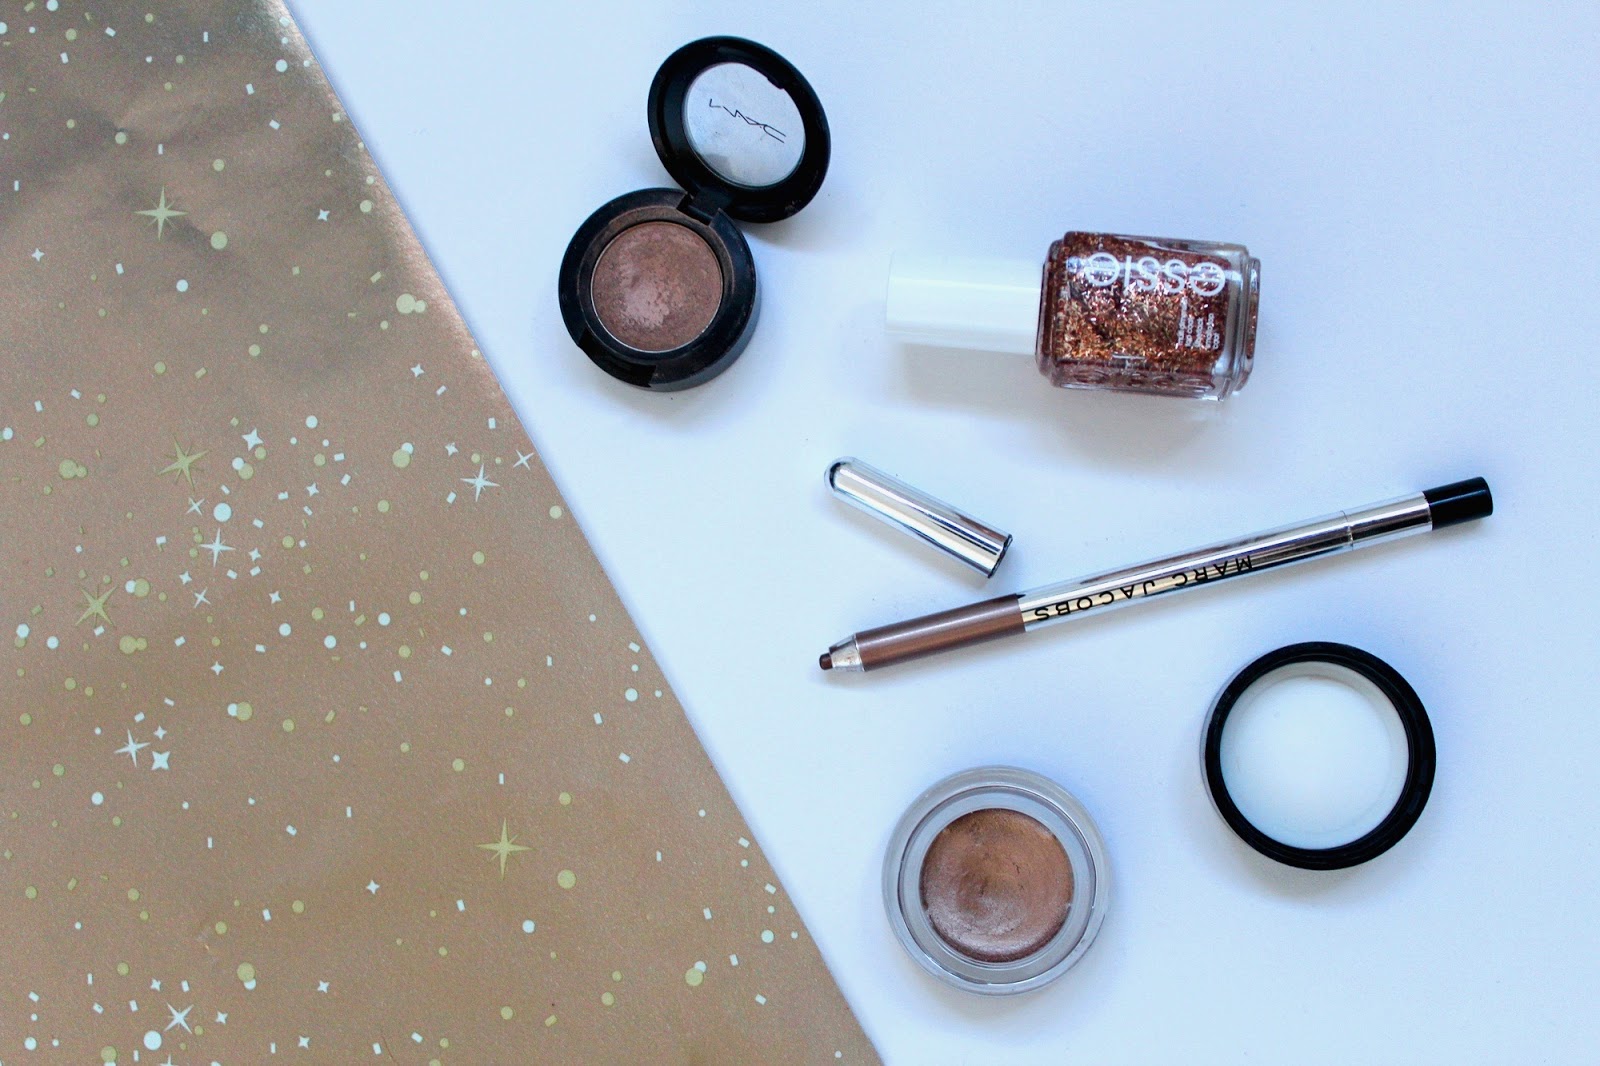 beauty makeup glitter mac all that glitters eyeshadow maybelline color tatto eye cream on and on brozne marc jacobs eyeliner rococoa essie tassle shaker nail polish varnish bblogger bbloggers flatlay instagram kirstie pickering christmas festive new years eve look